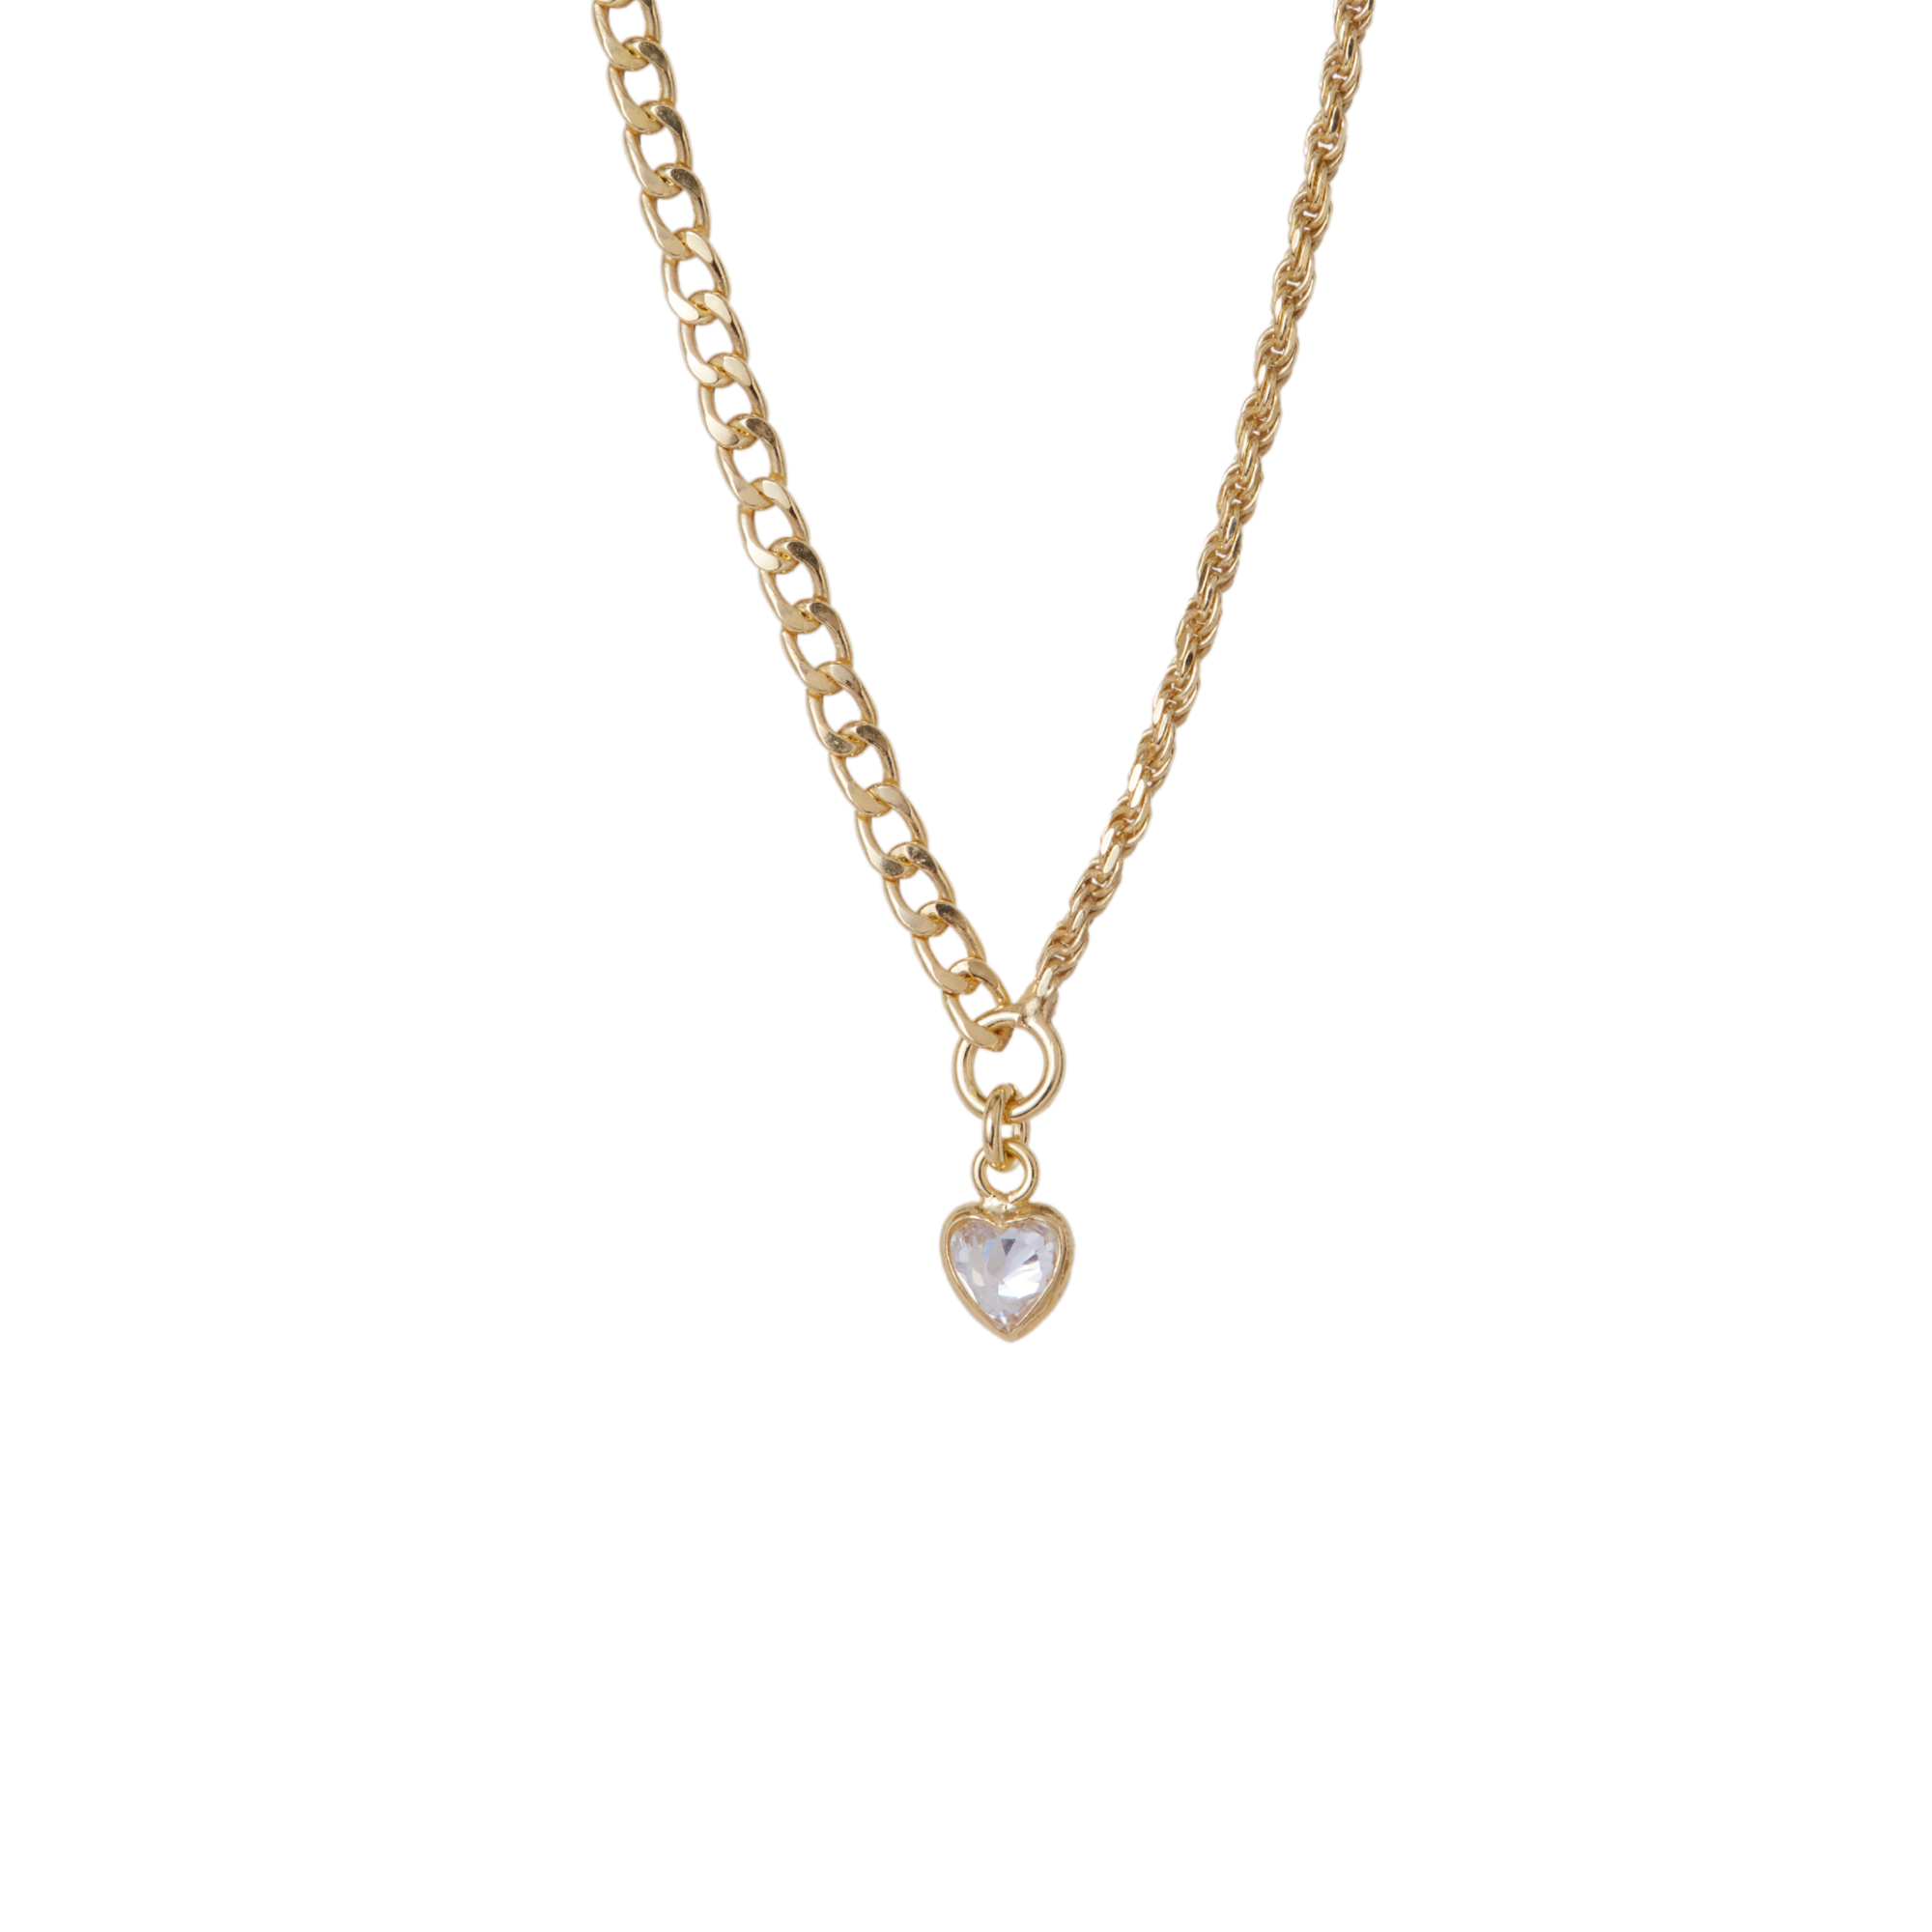 THE CZ HEART ROPE CURB NECKLACE